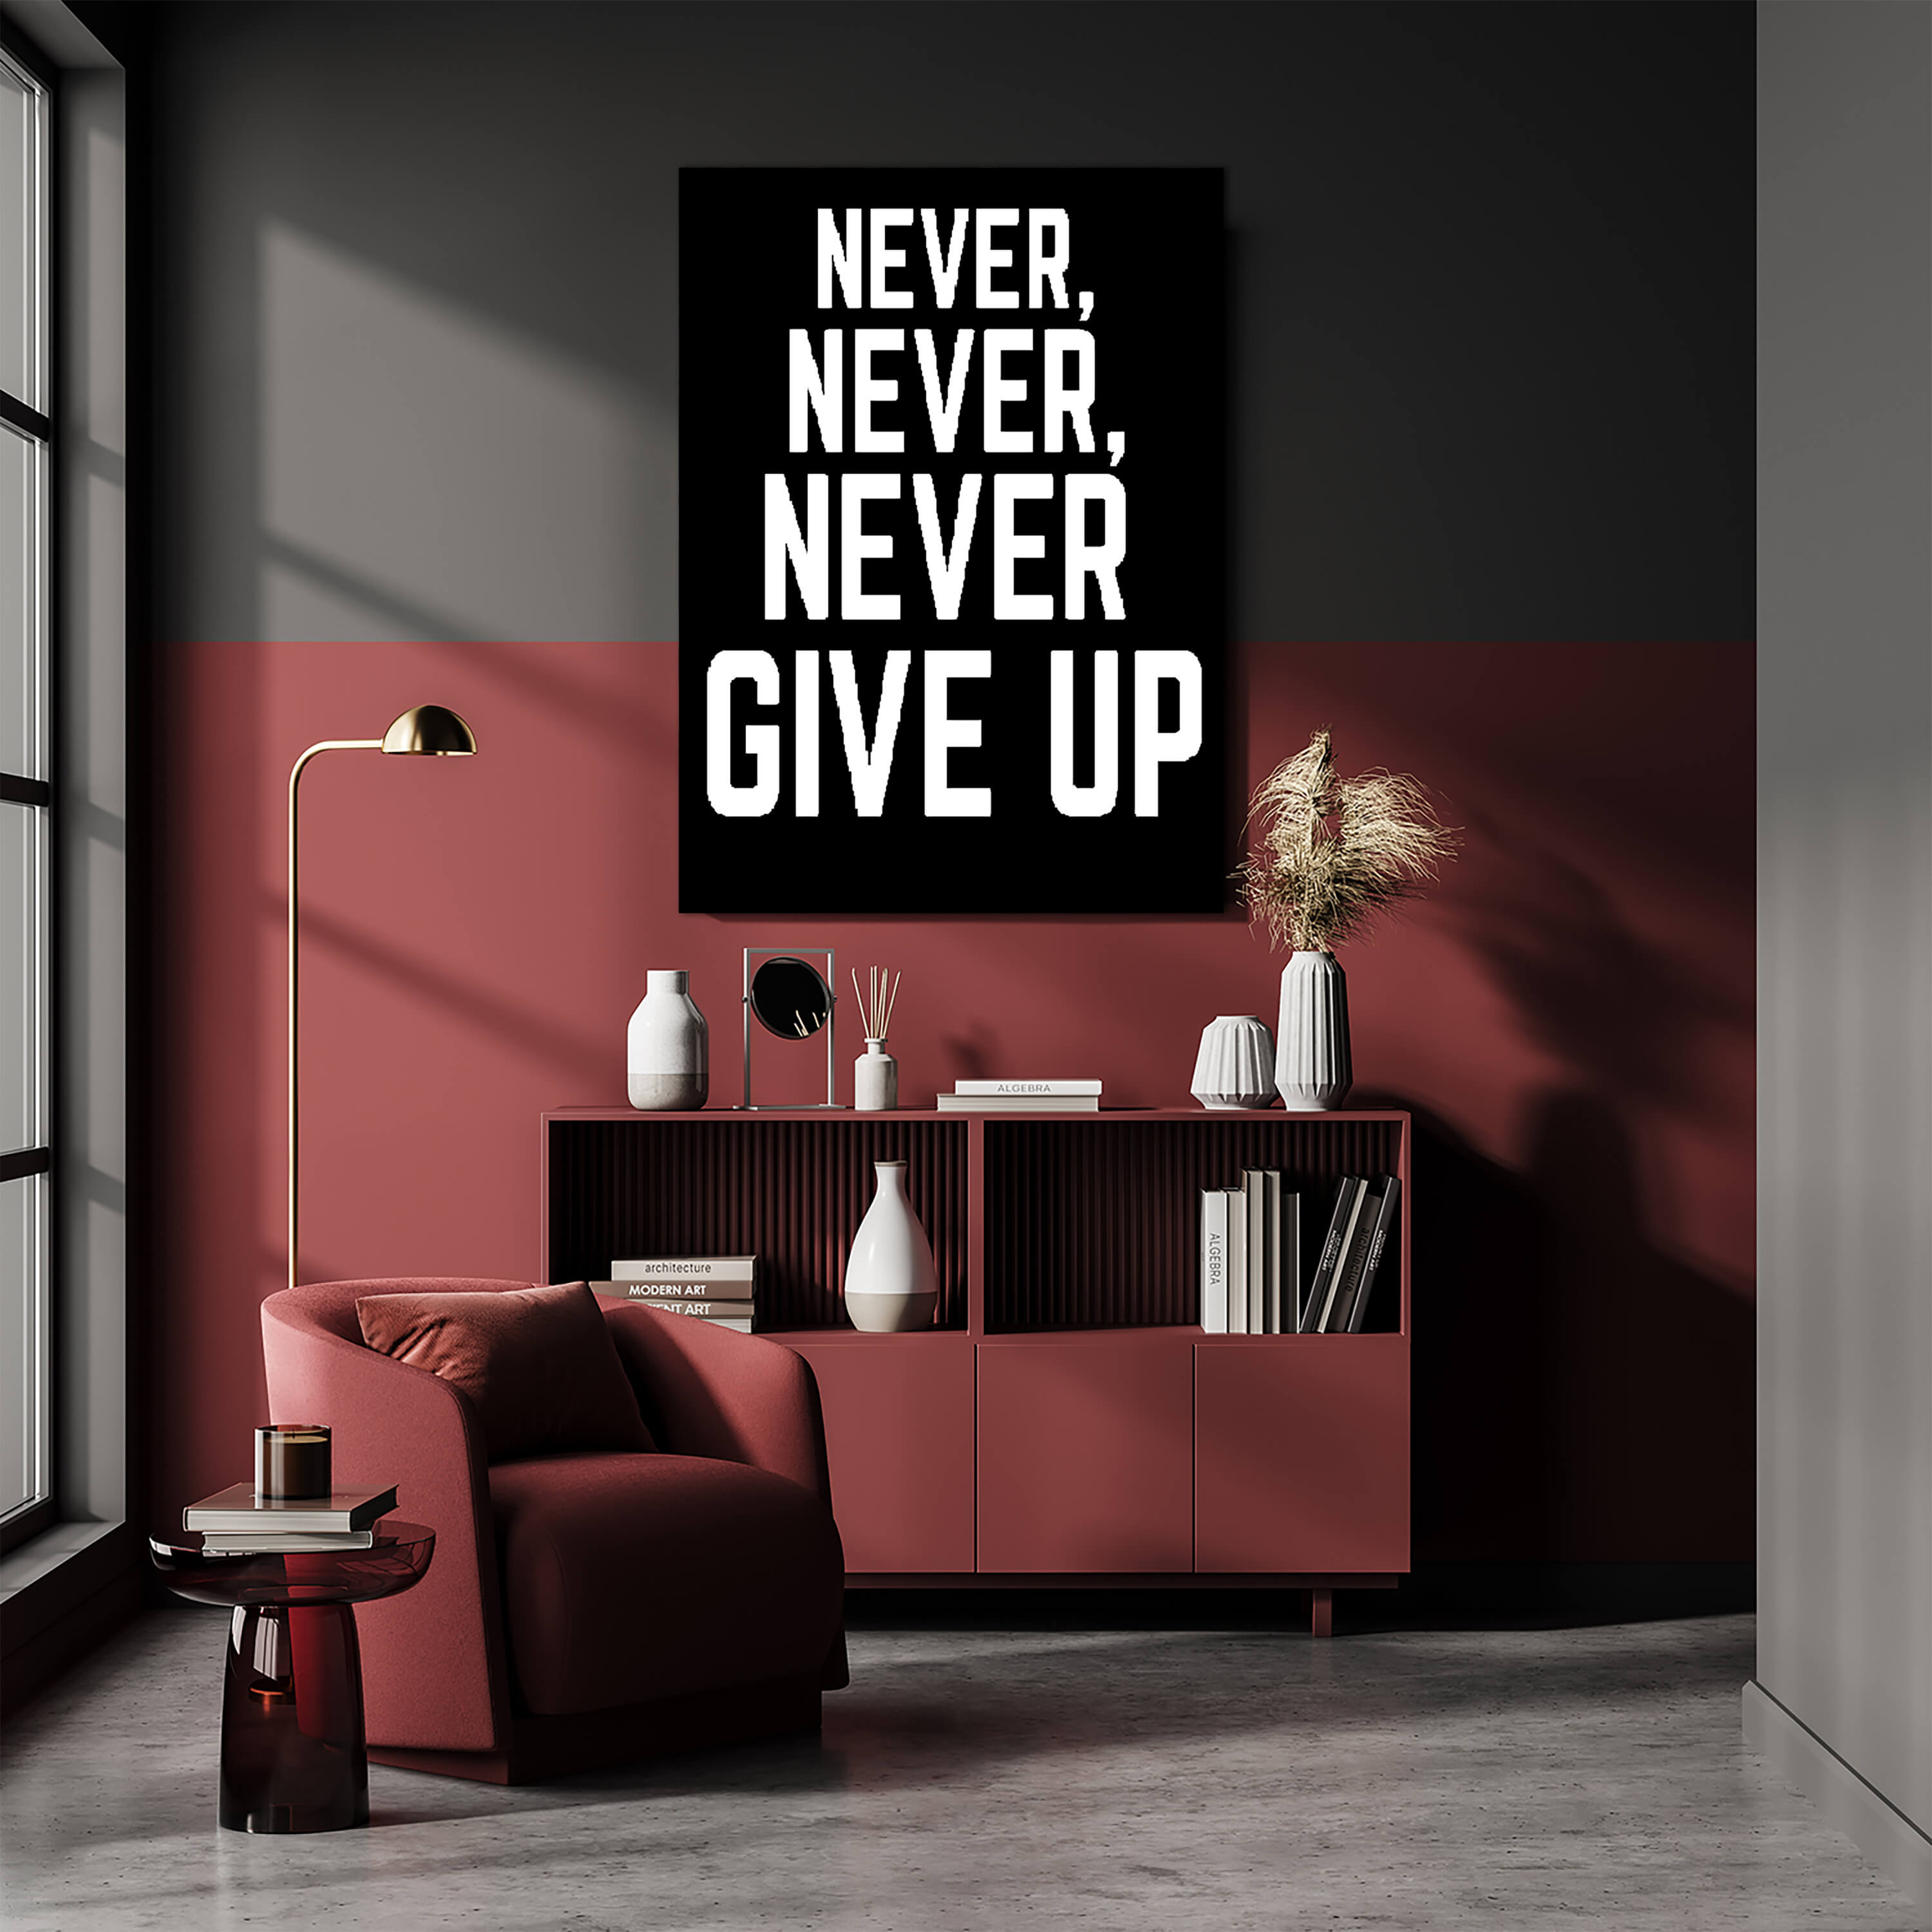 WW3_0029_never never never give up AOA11117